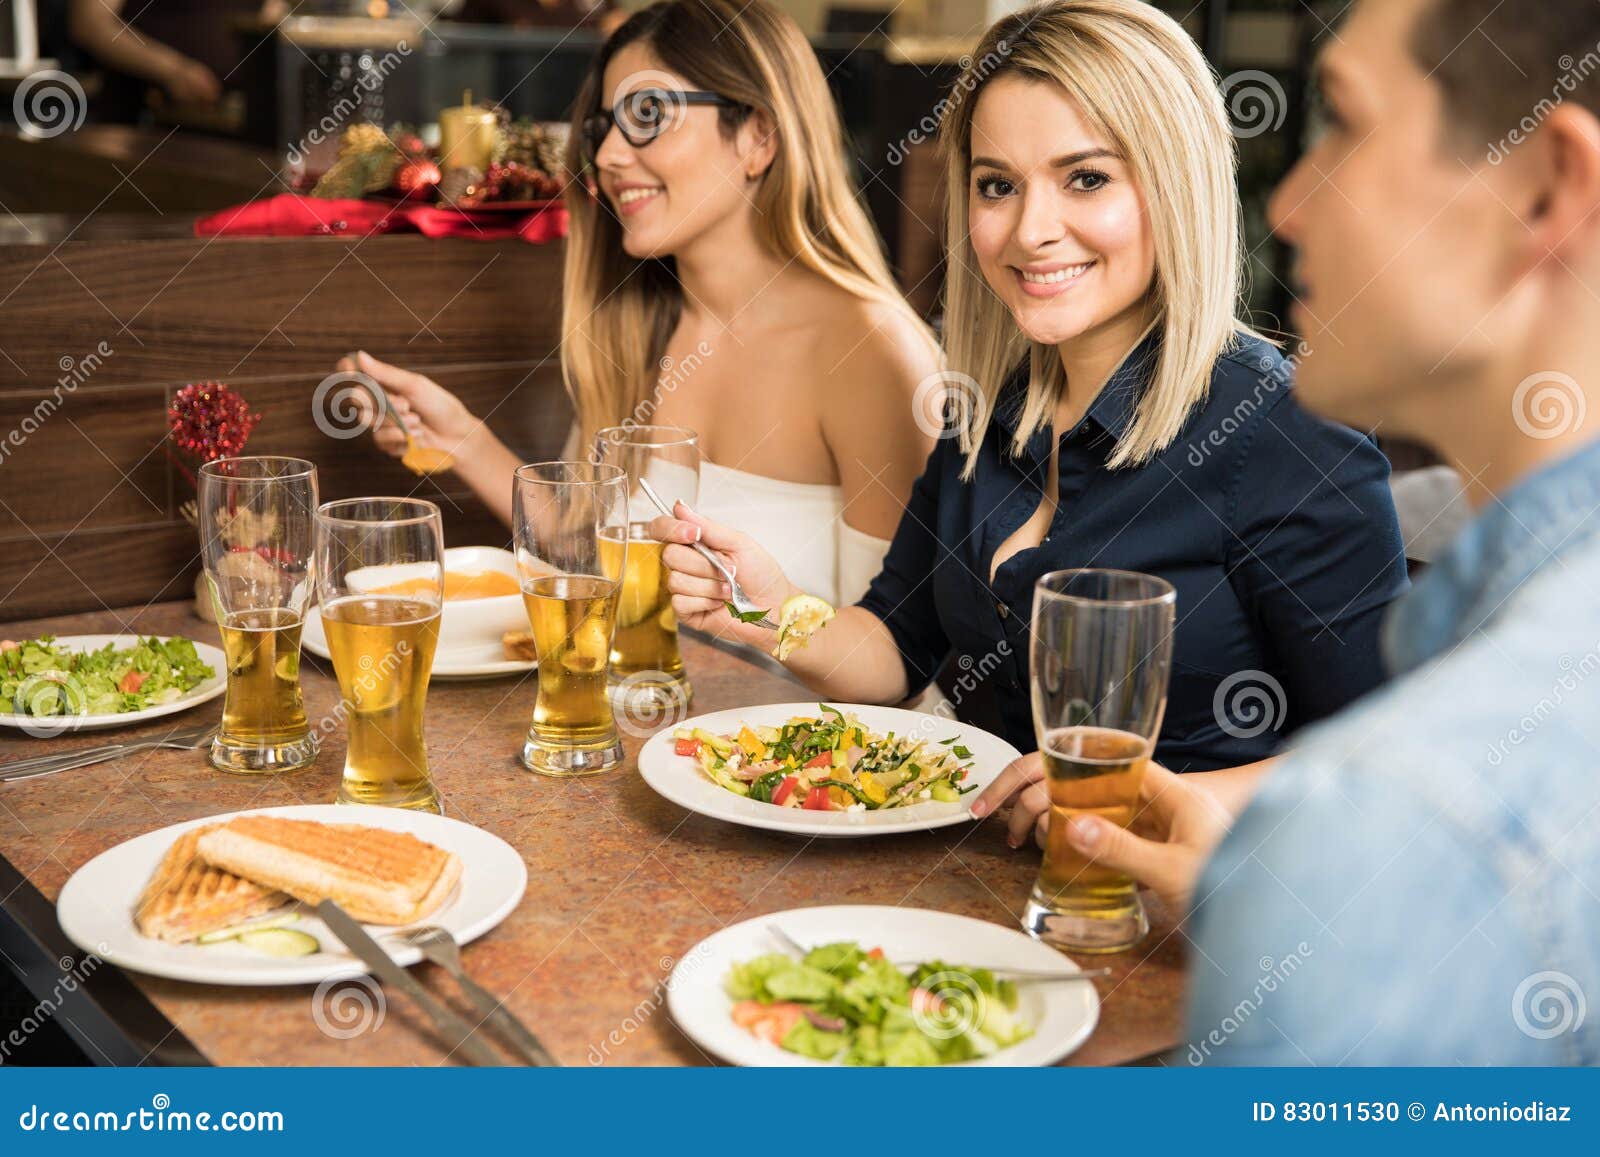 Girl Eats Out Friend